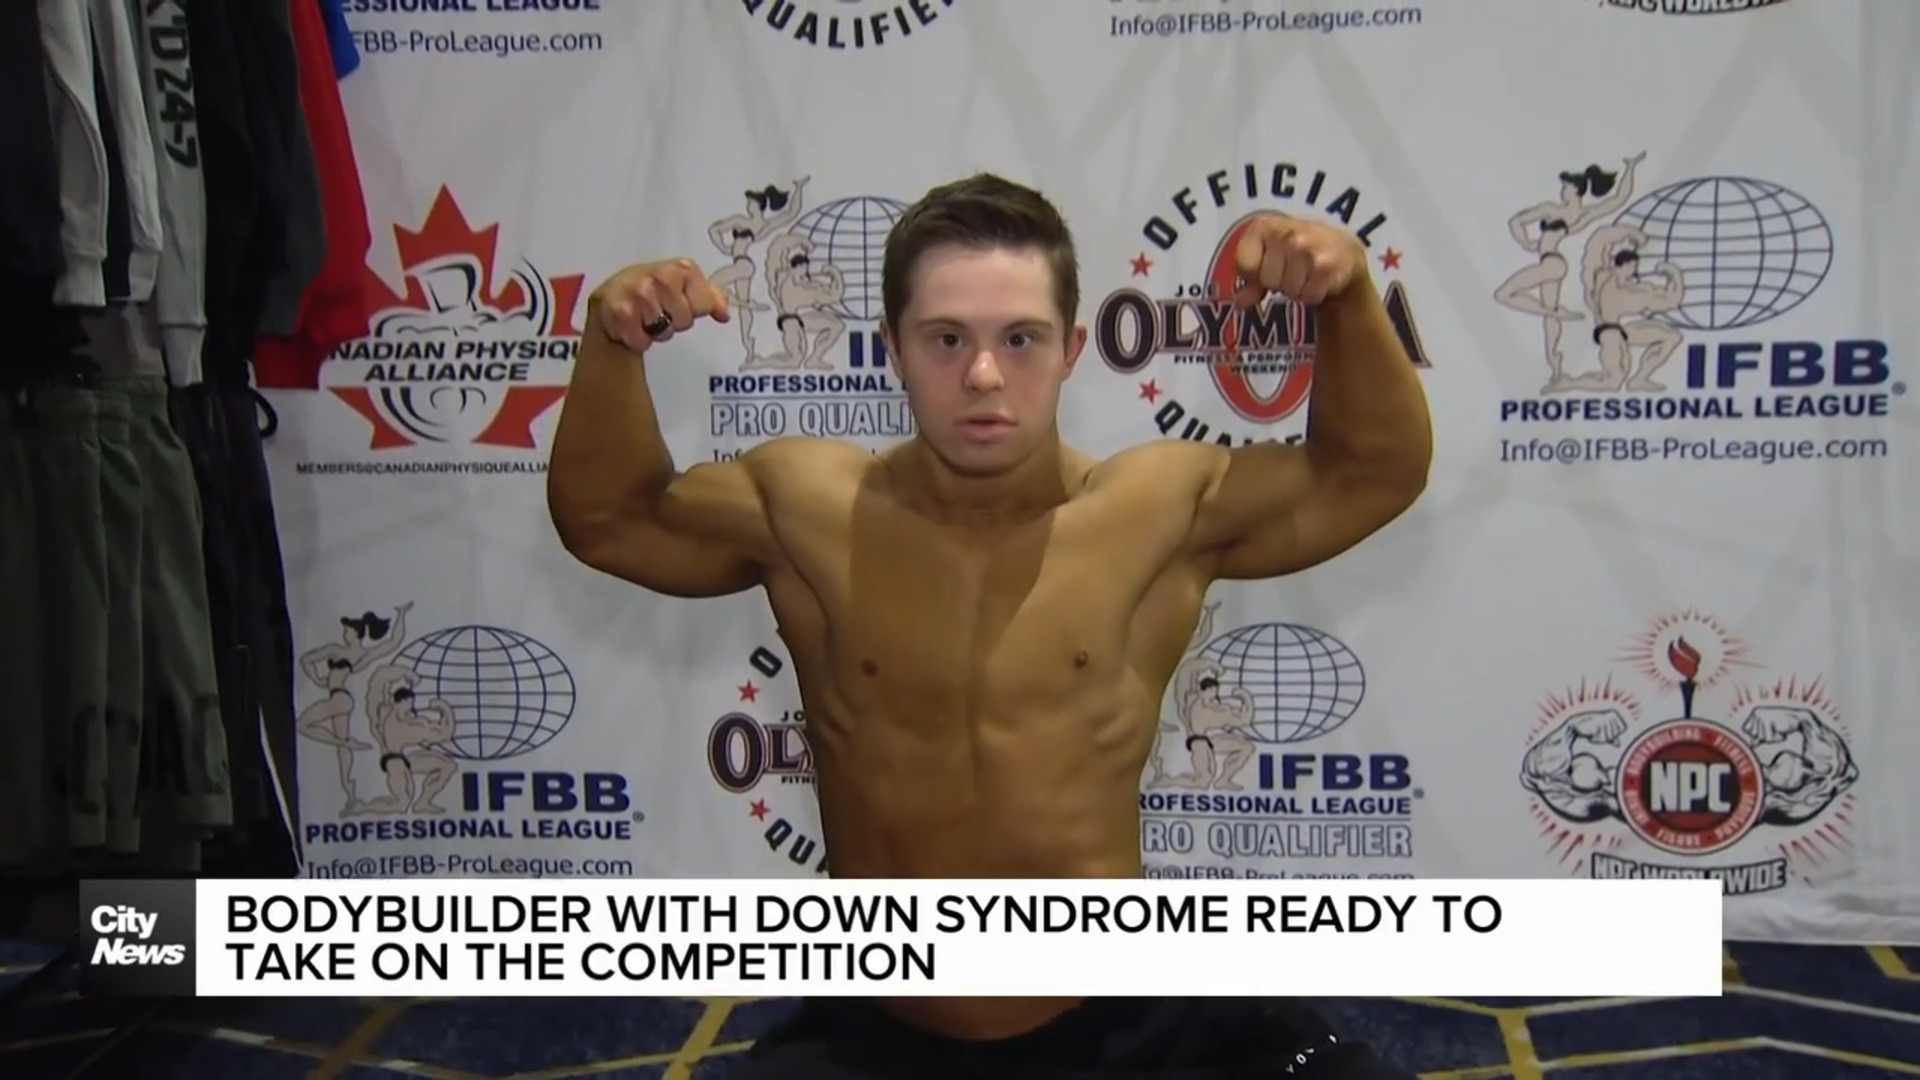 Bodybuilder with Down syndrome ready to take on the competition